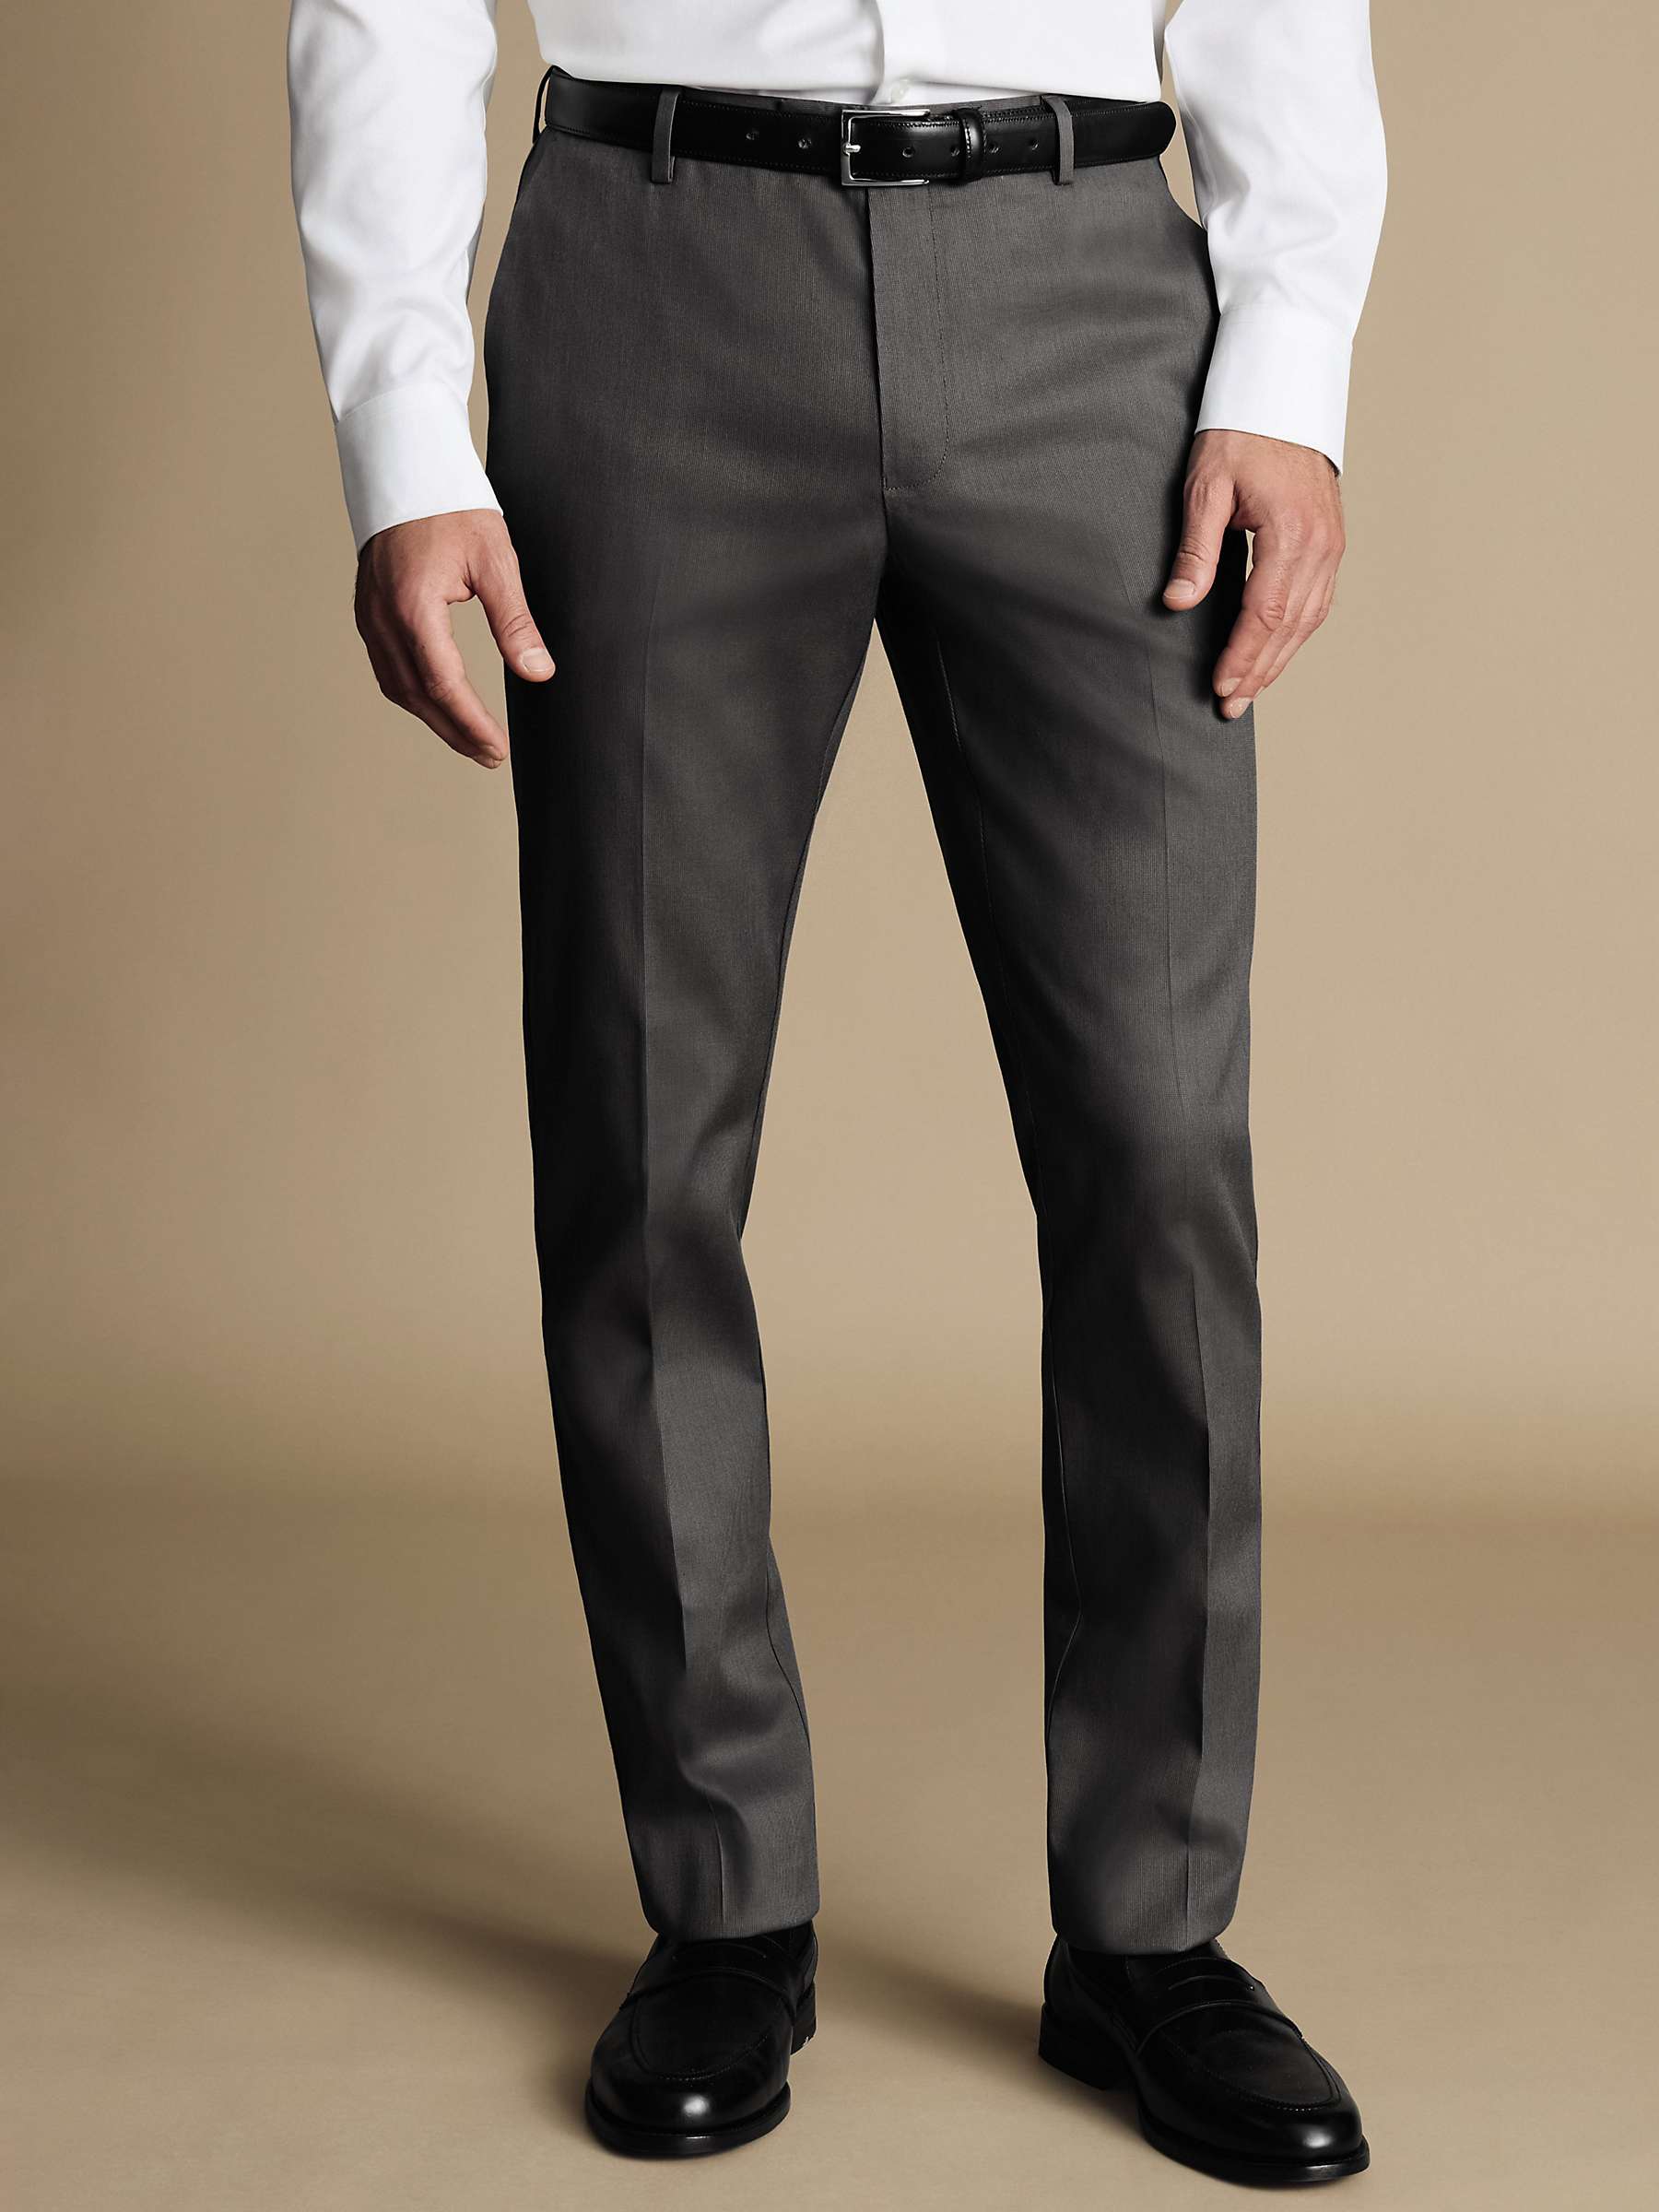 Buy Charles Tyrwhitt Smart Texture Classic Fit Trousers Online at johnlewis.com